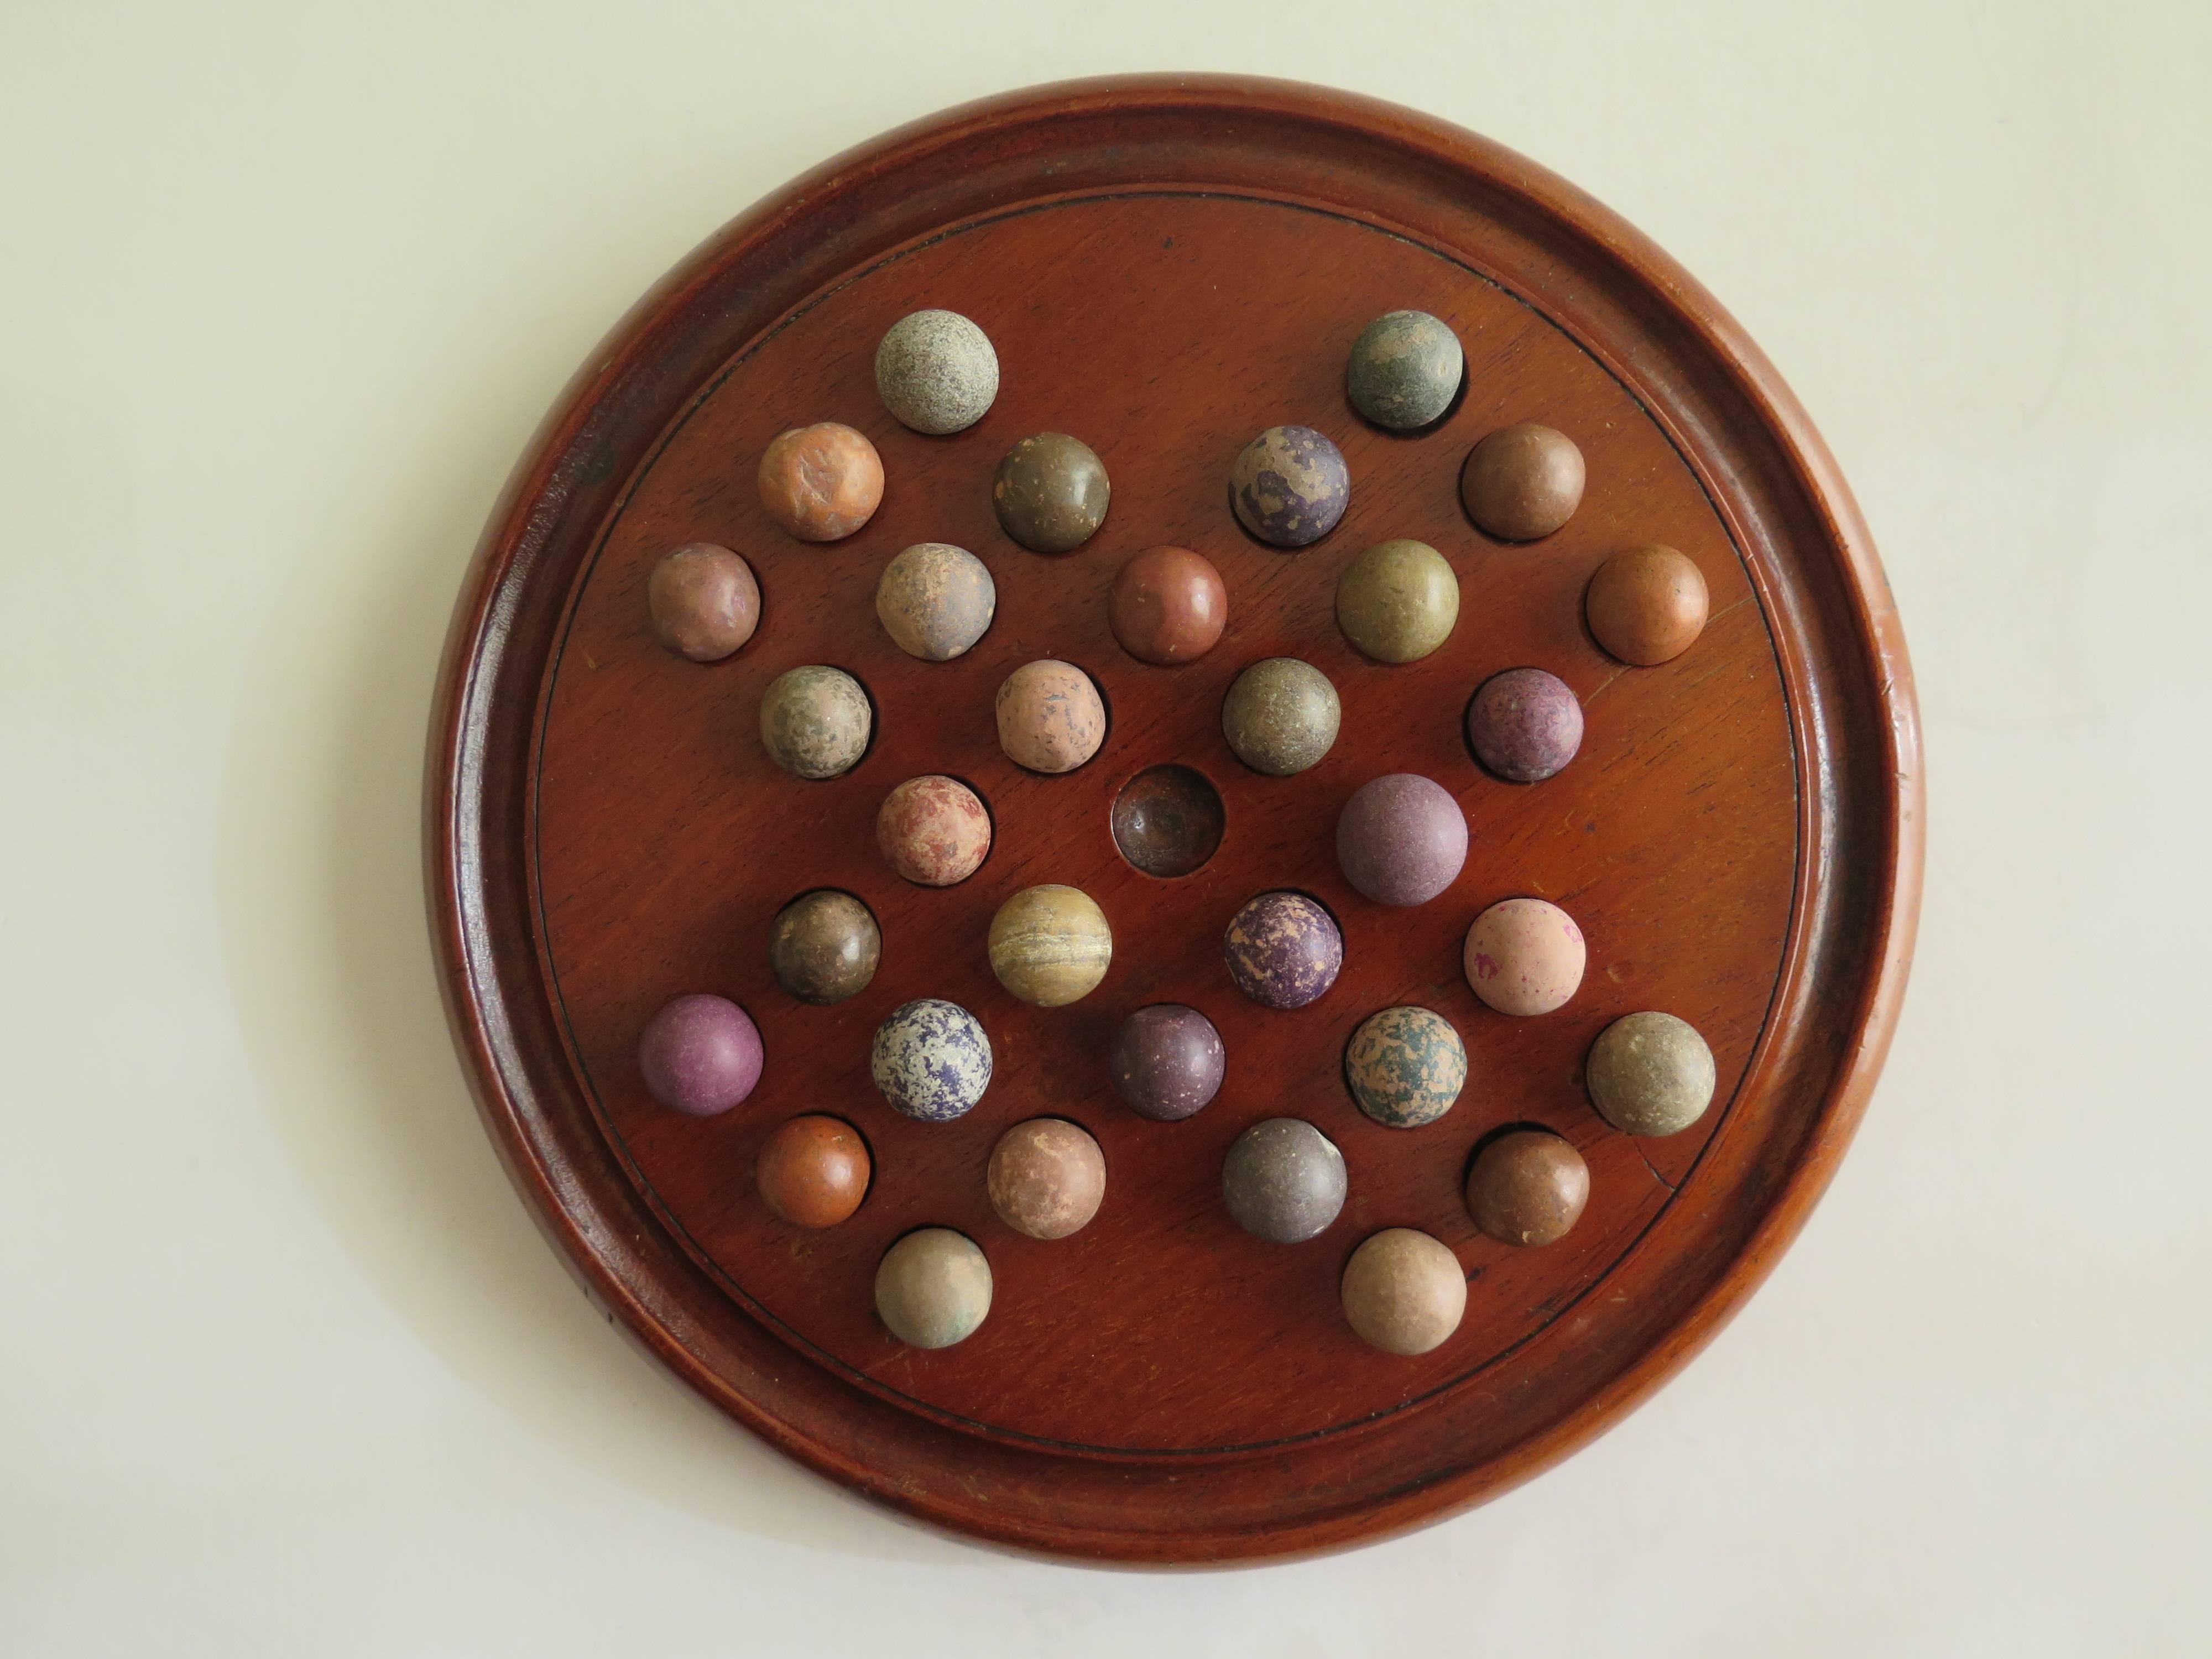 Hand-Crafted 19th Century, Solitaire Marble Board Game, with 32 Handmade Marbles, circa 1880